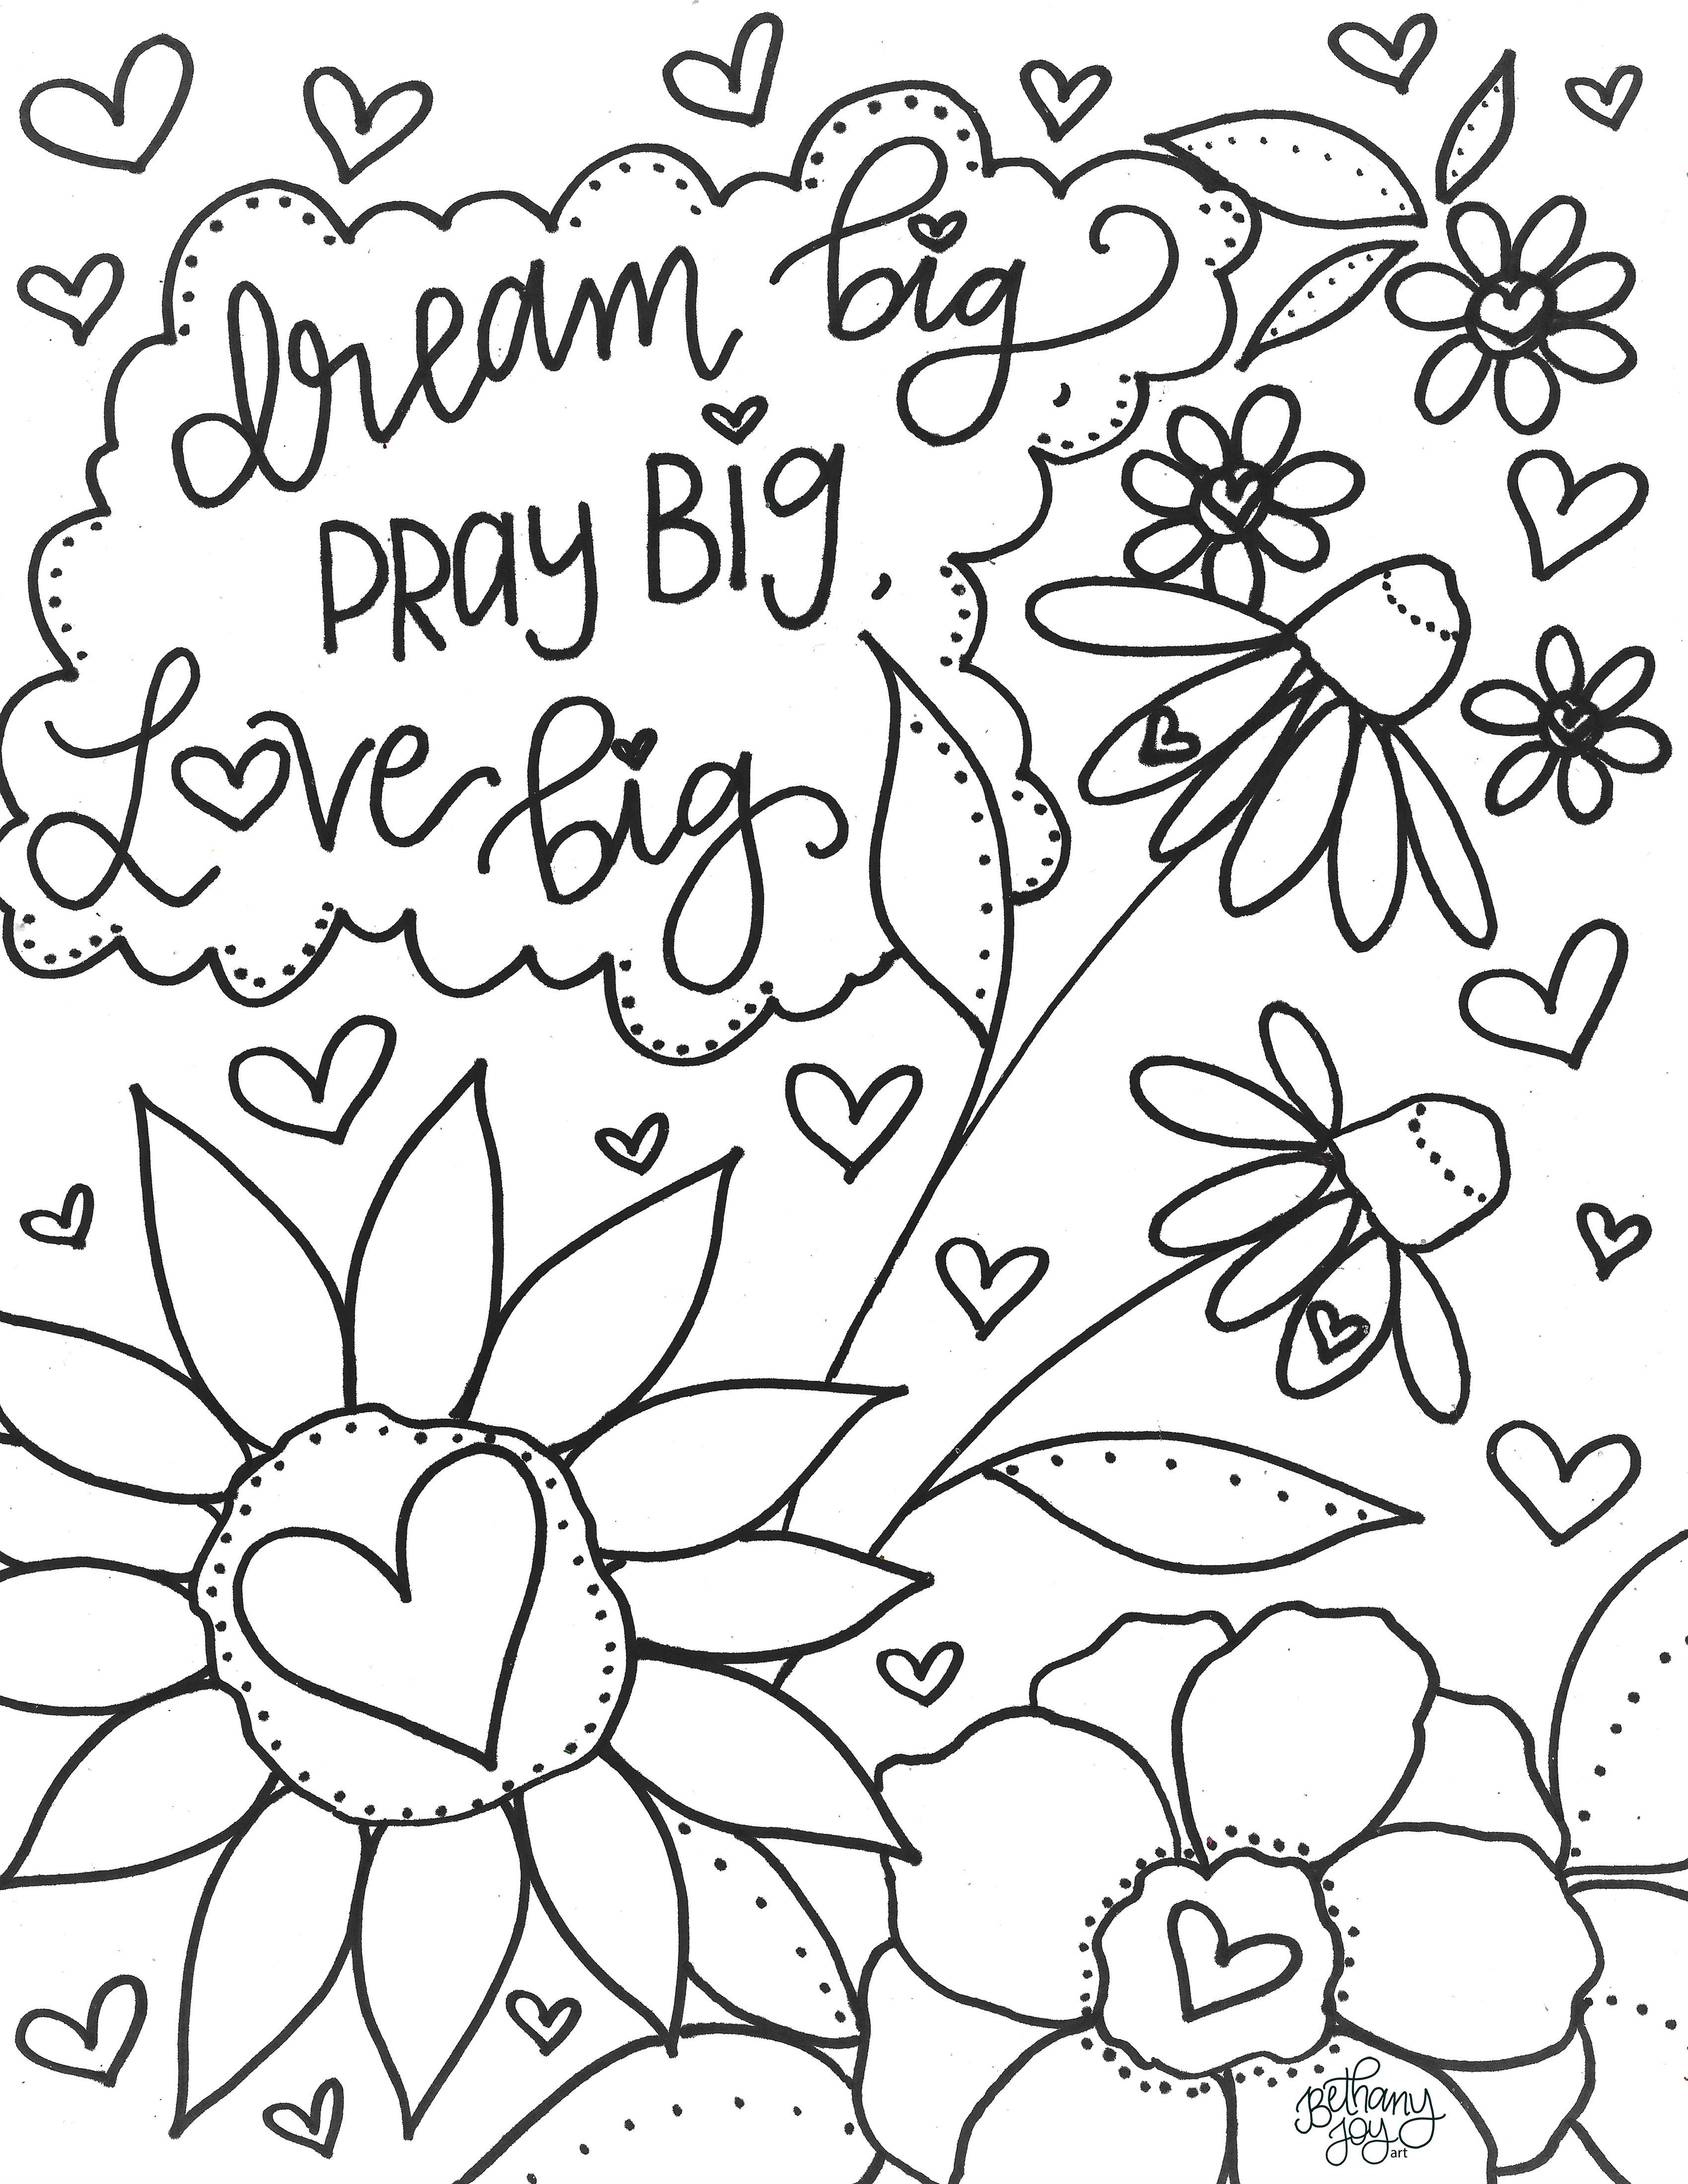 Coloring pages for you to enjoy â bethany joy art